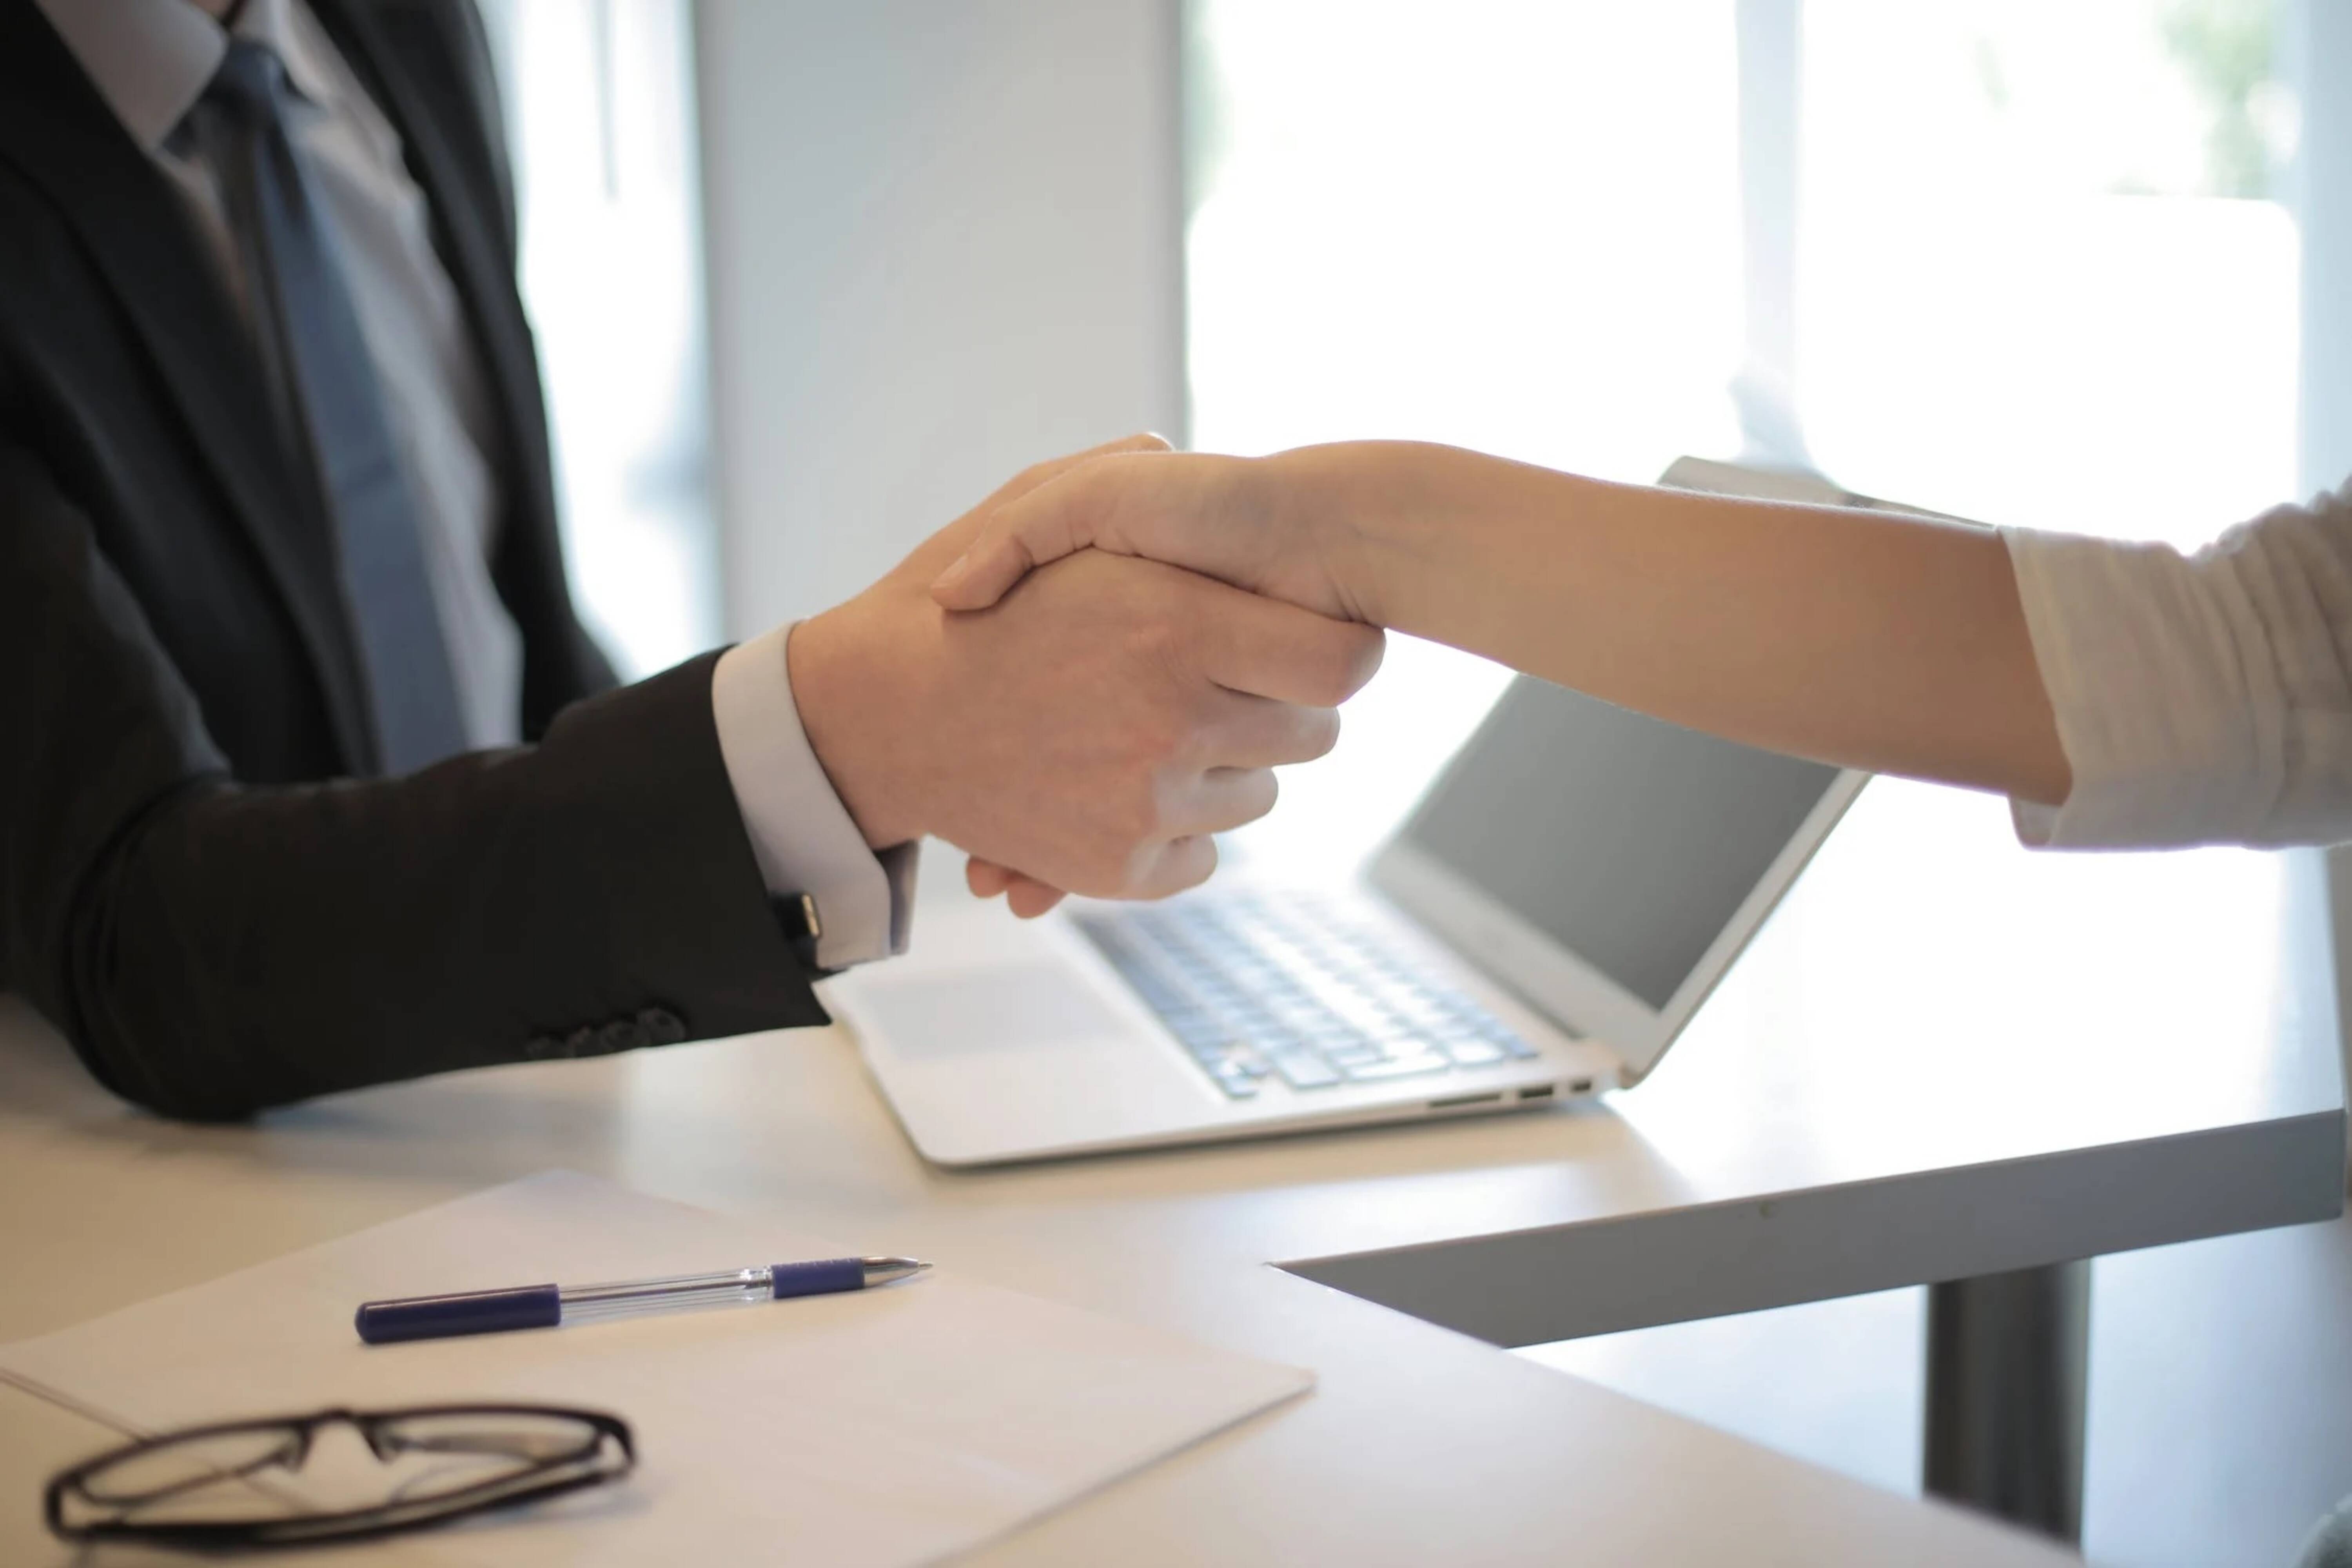 A close-up of two people shaking hands in an office.